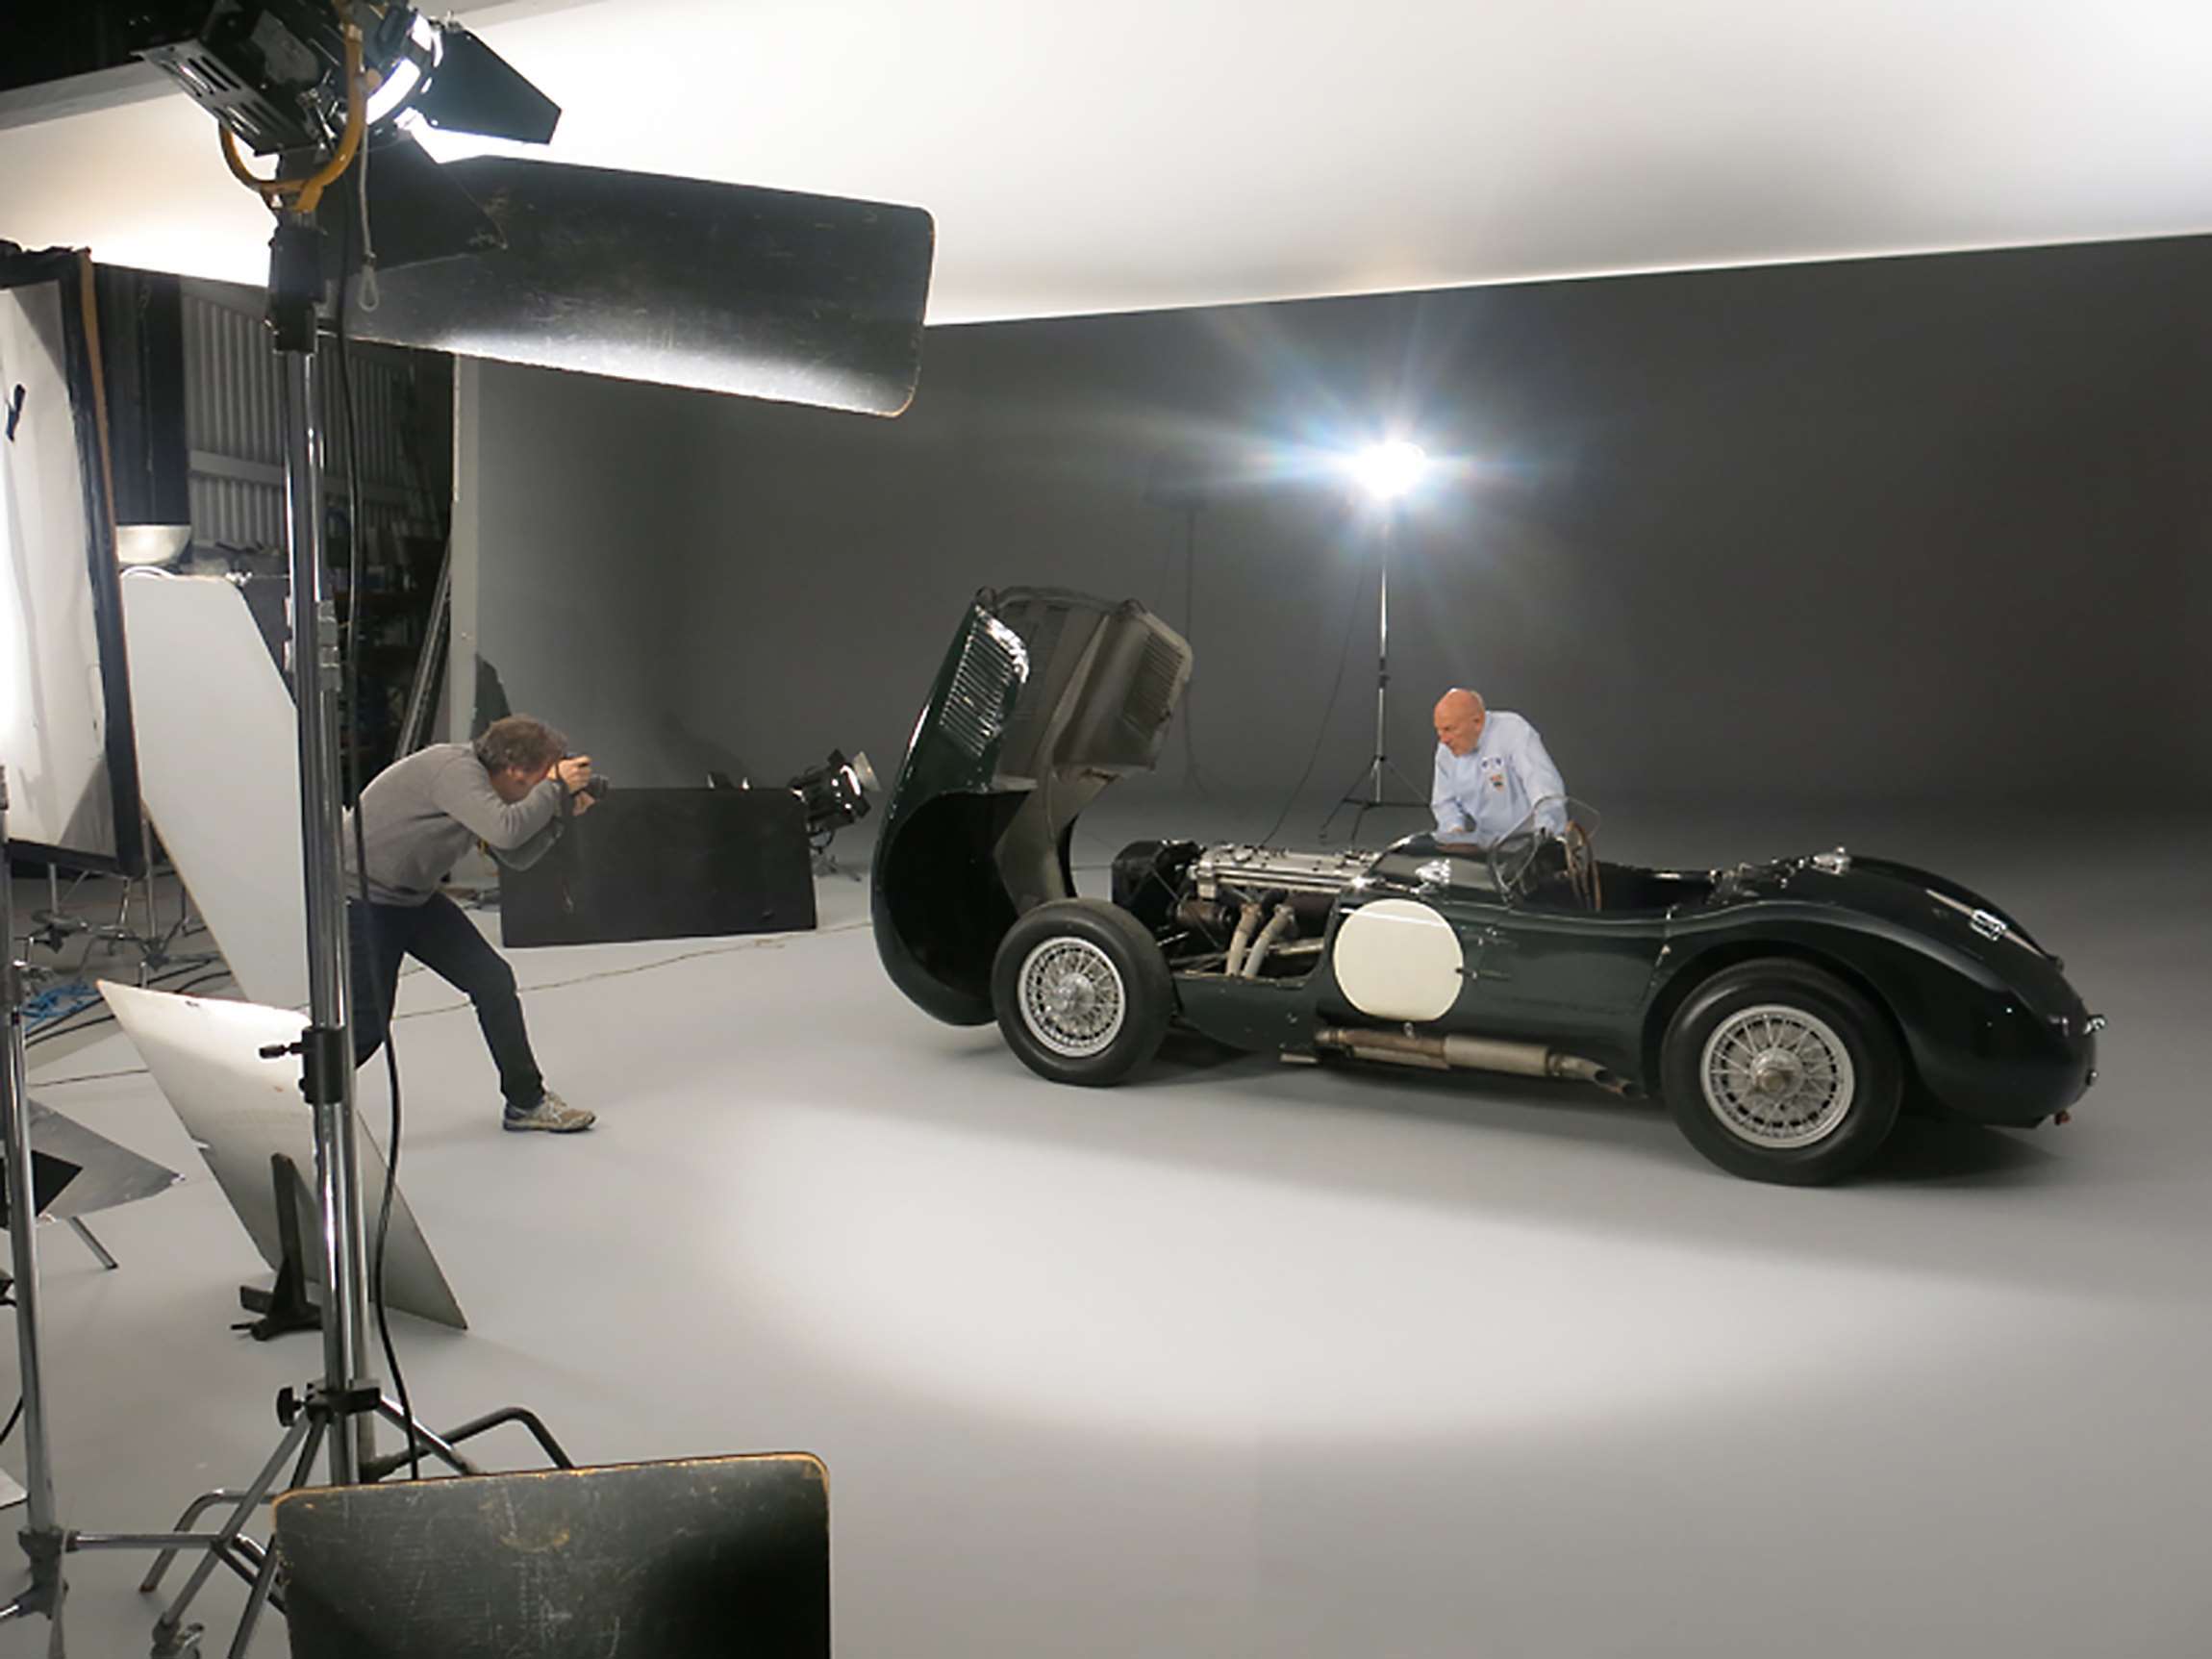 gpl-octane-photo-shoot-with-c-type-pov-114-and-stirling-moss-img_3148.jpeg18051608.jpg